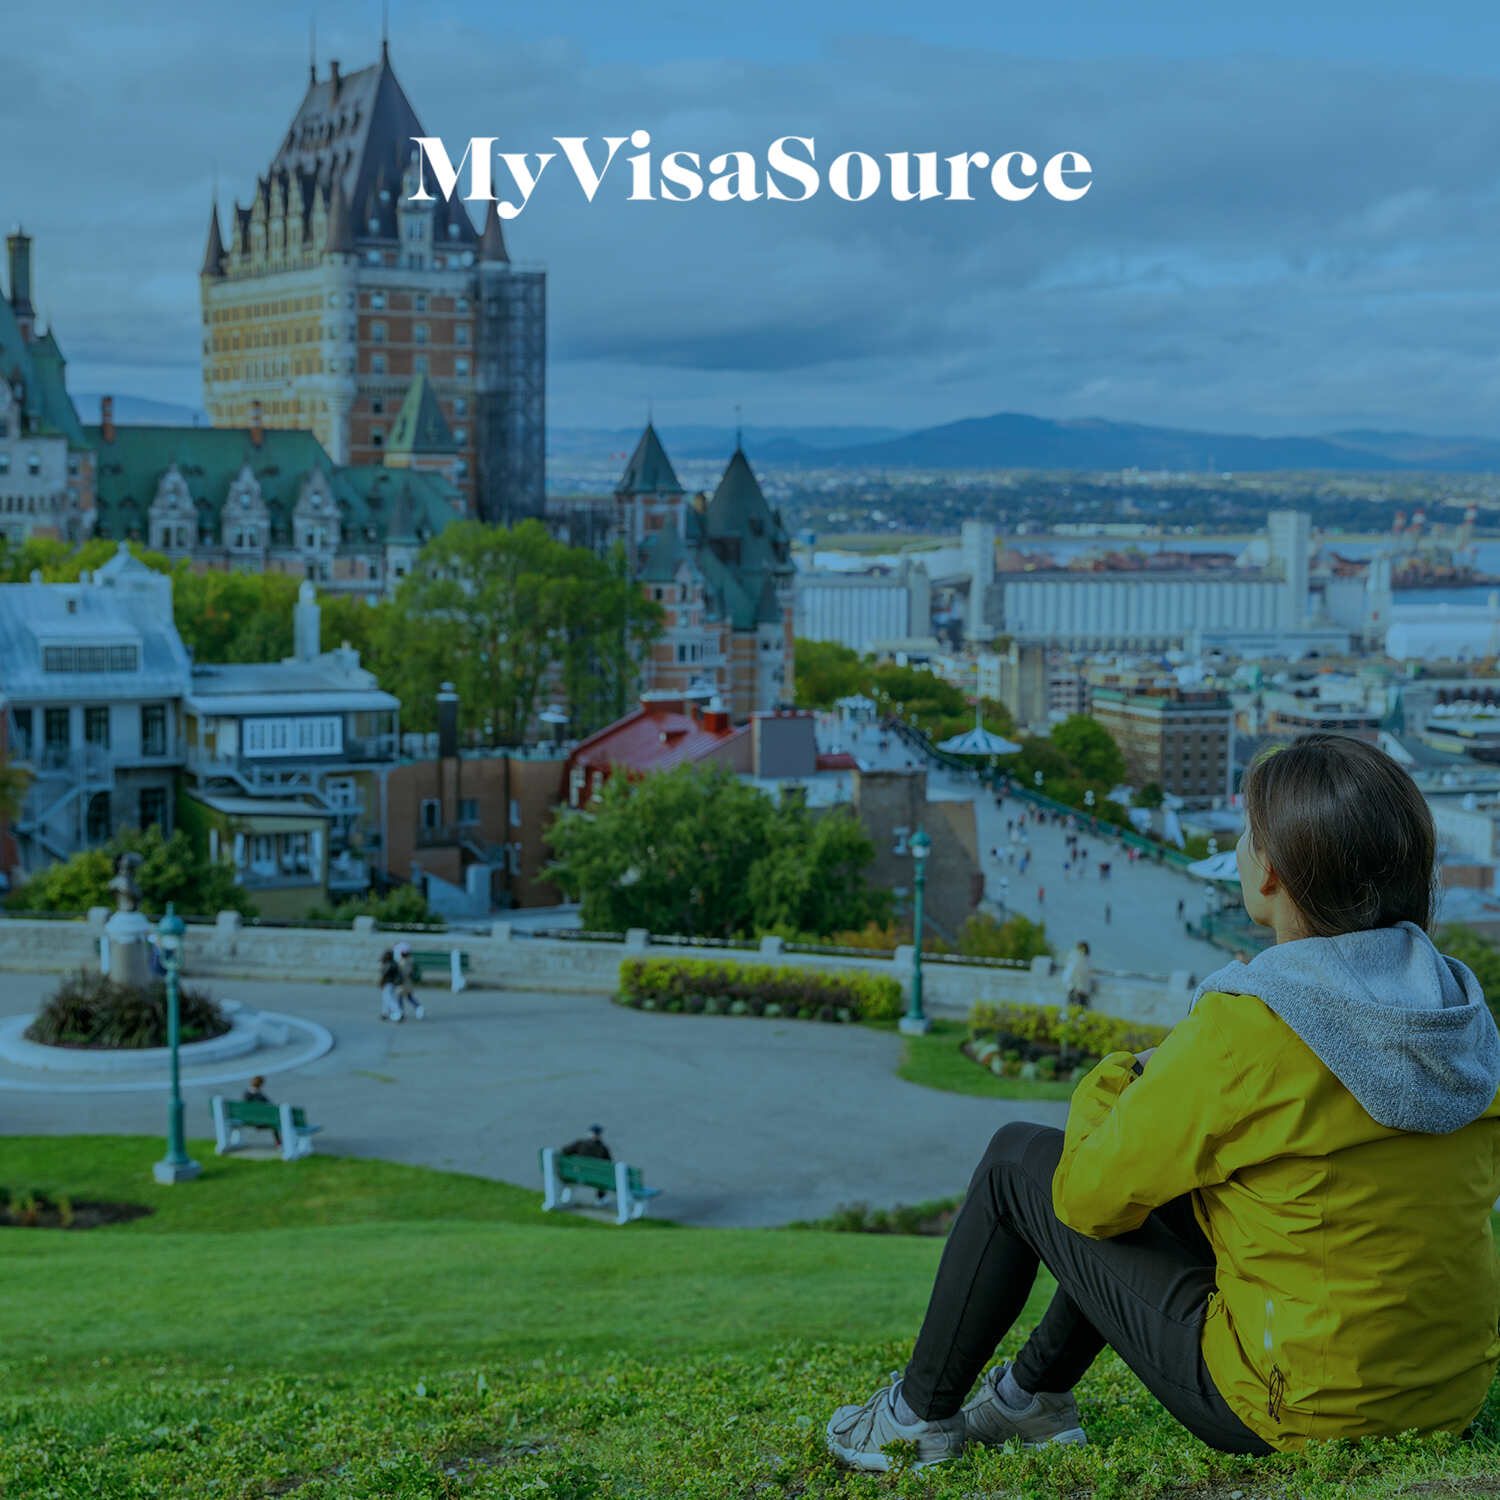 wide picture of an old castle in quebec city my visa source